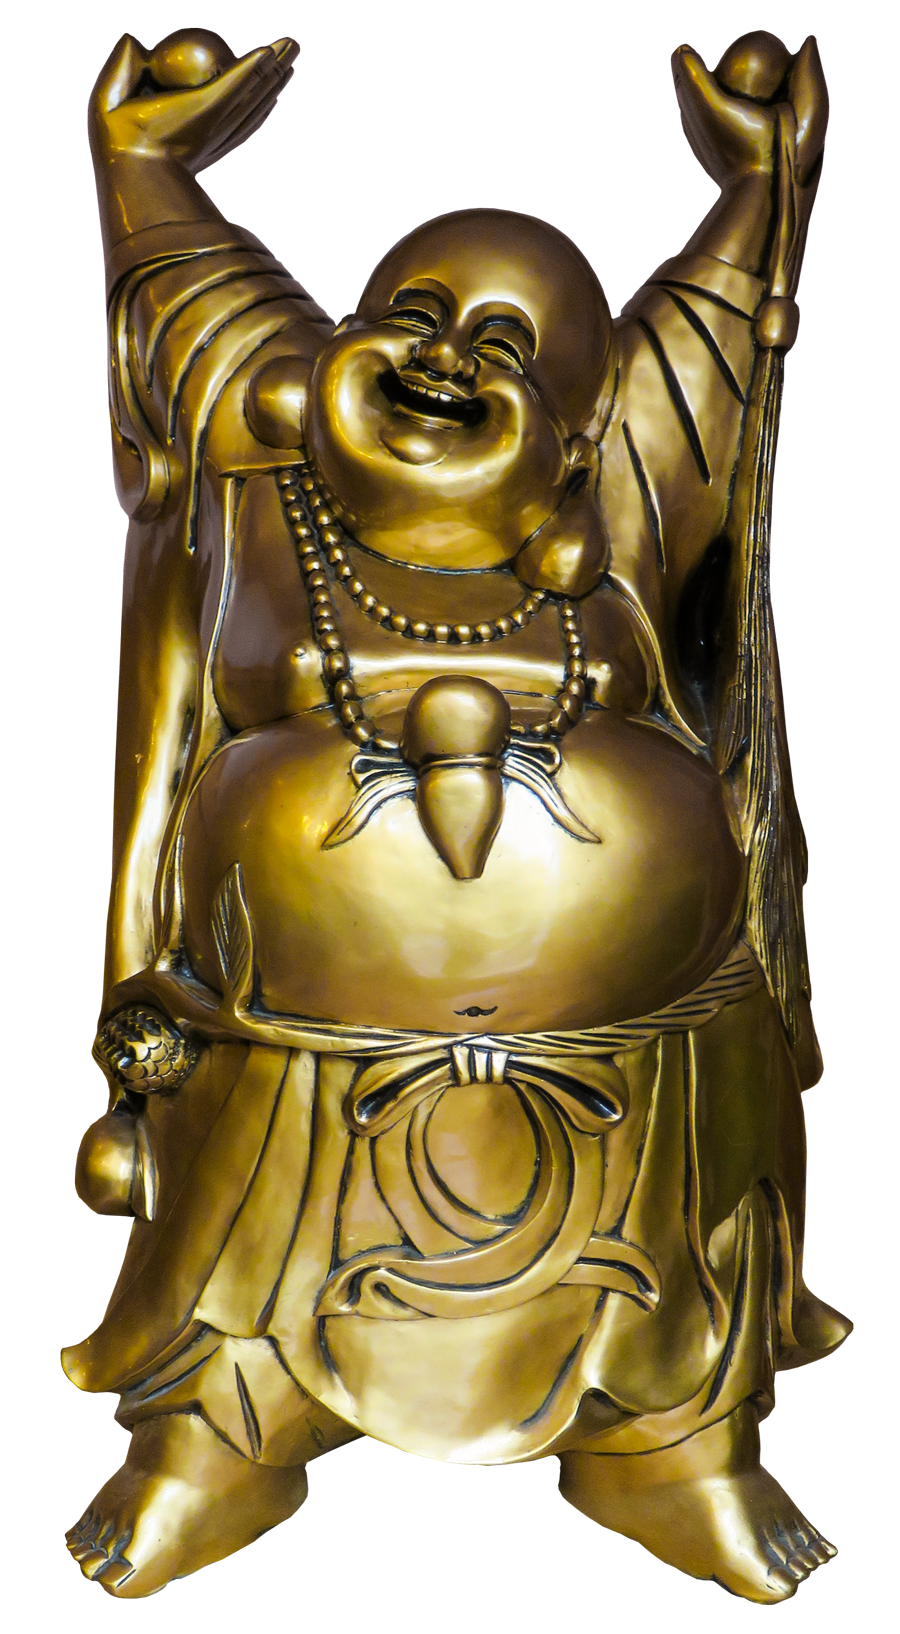 A Gold Statue Of A Smiling Buddha